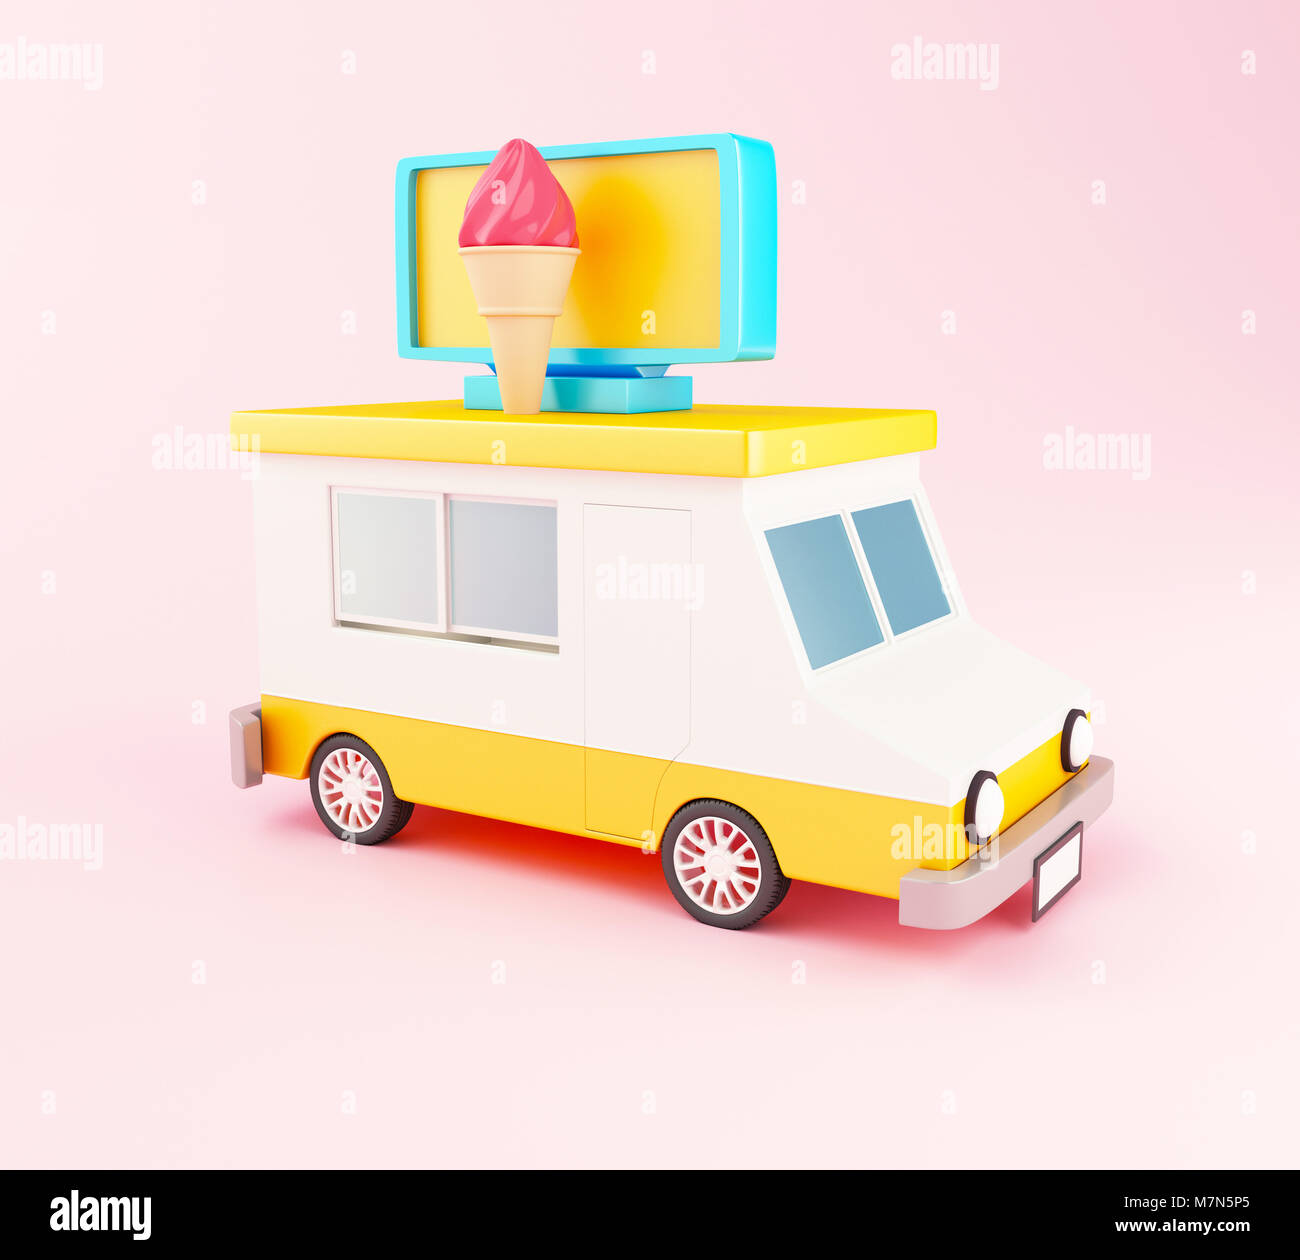 3d illustration. Ice cream food truck cartoon style on pink background. Fast food concept. Stock Photo